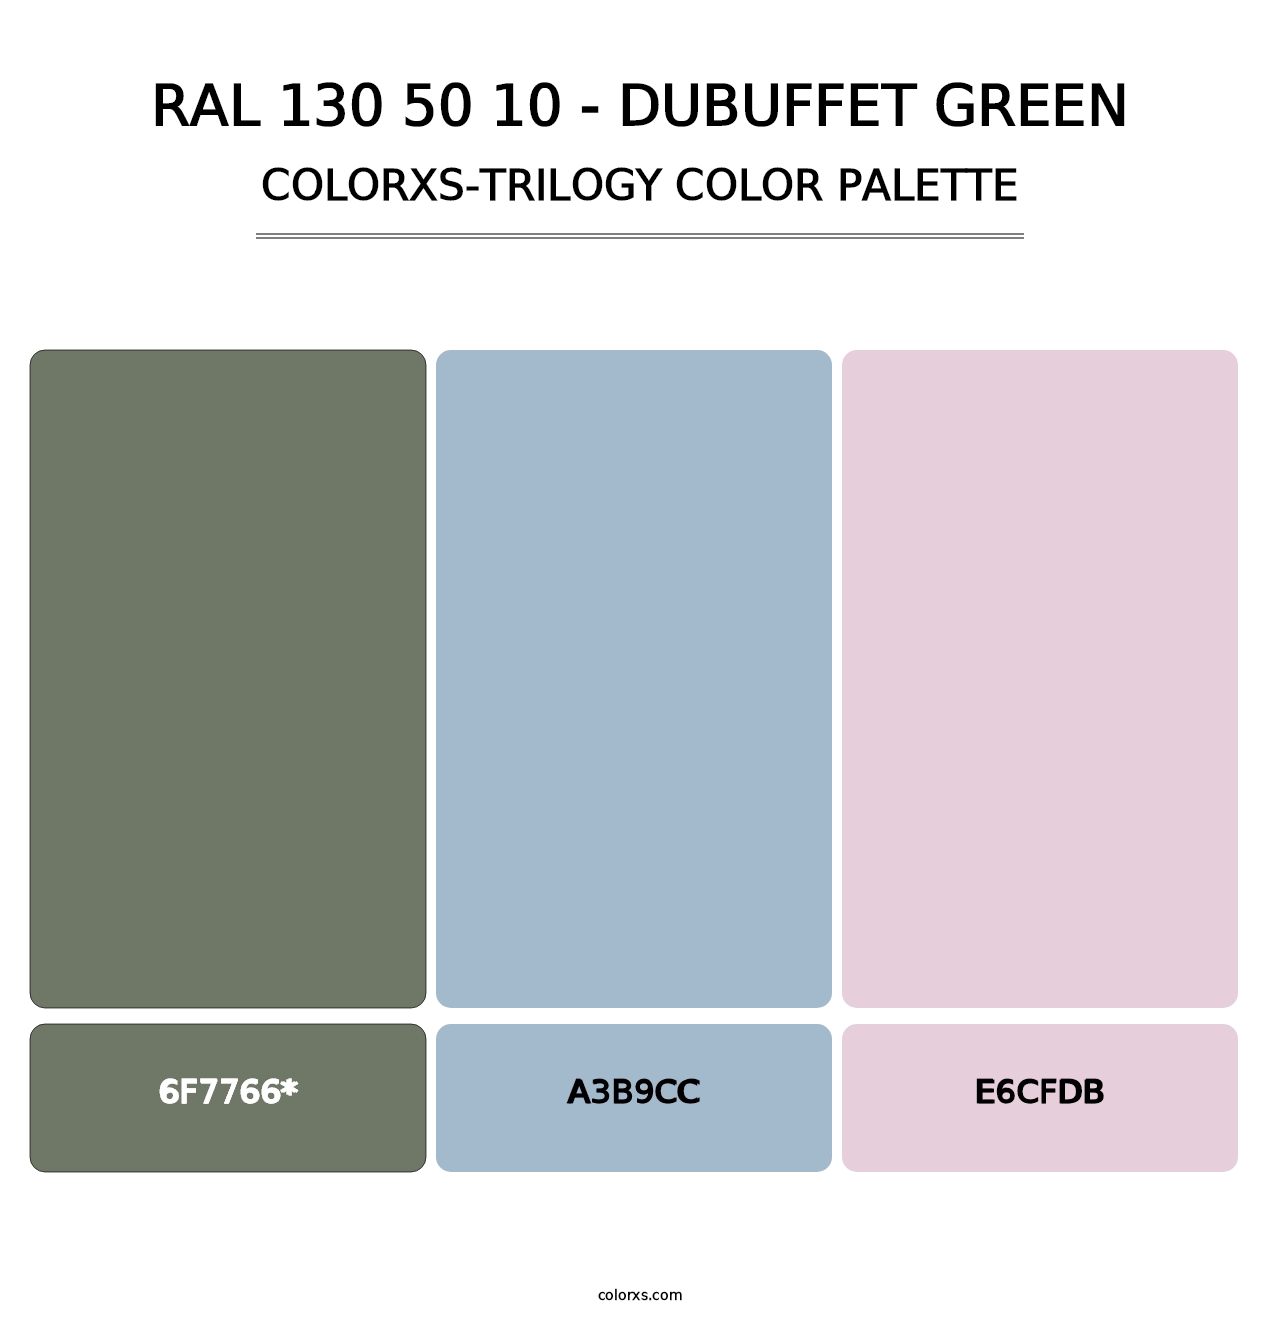 RAL 130 50 10 - Dubuffet Green - Colorxs Trilogy Palette